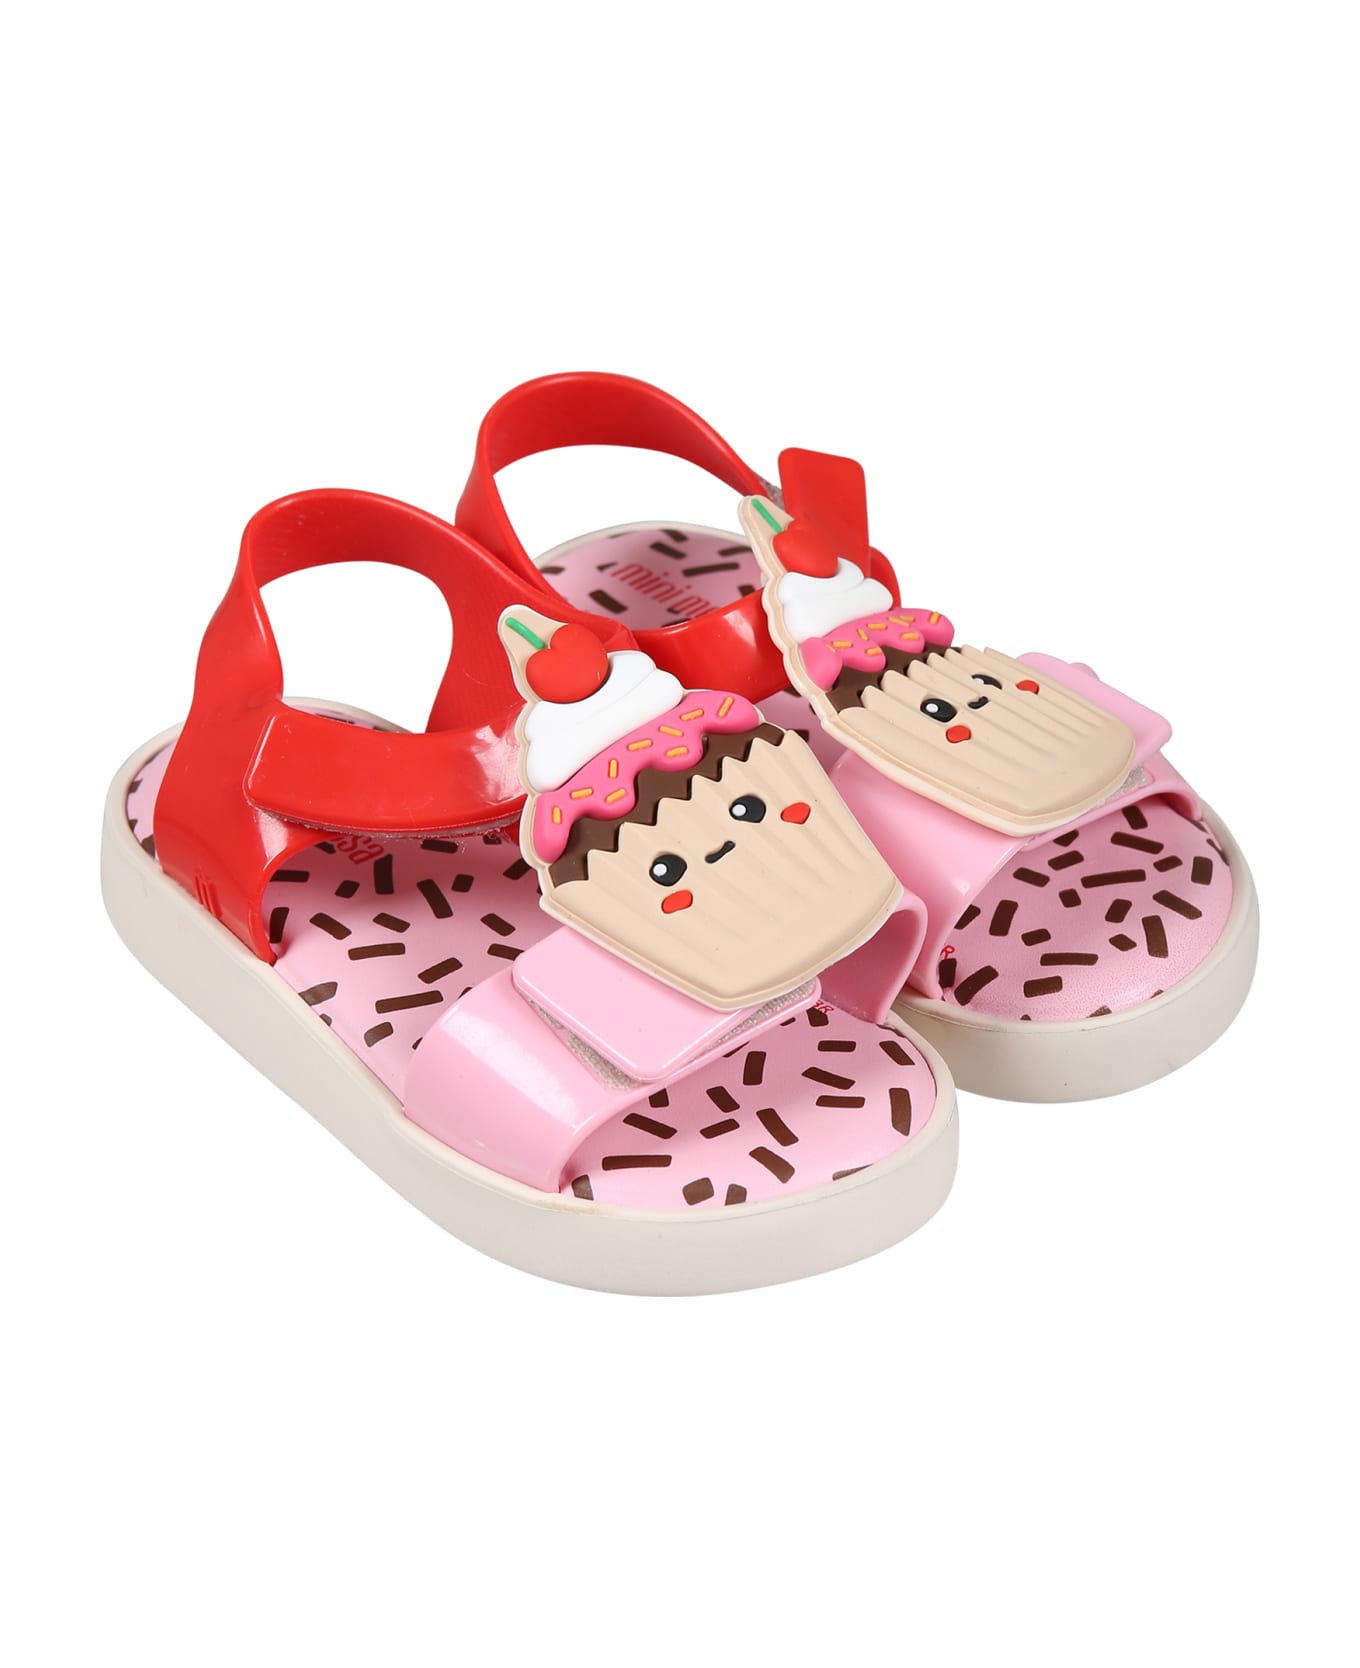 Melissa Multicolor Sandals For Girl With Cupcake And Logo - Multicolor シューズ